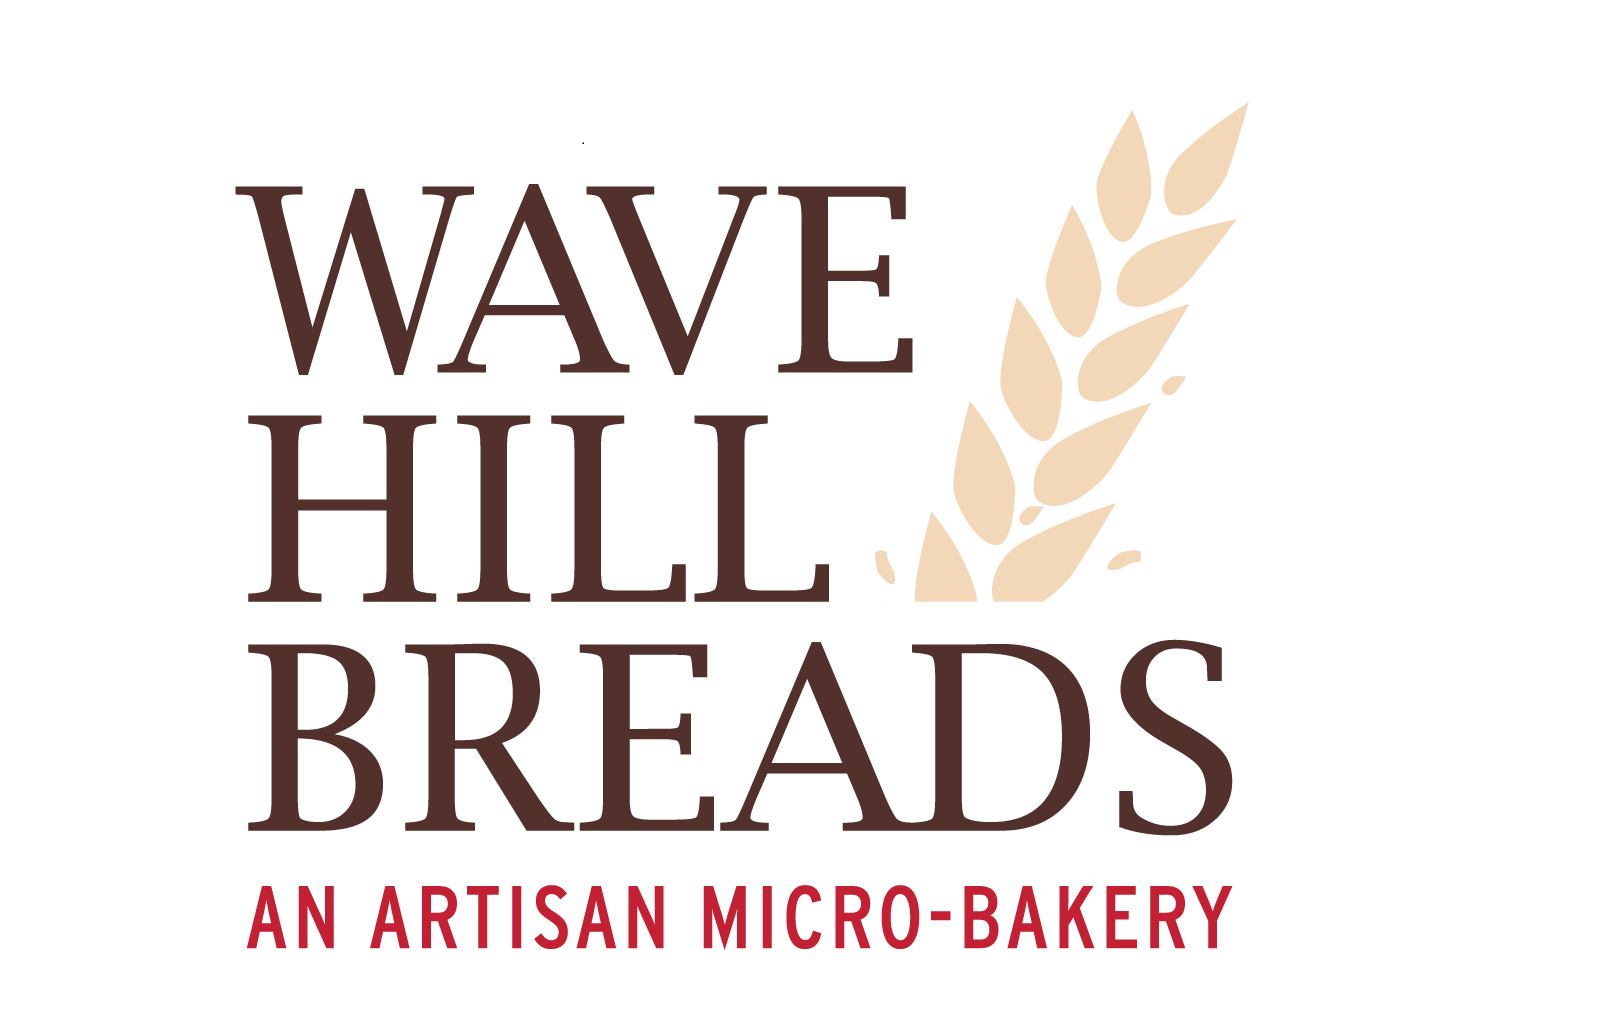 Wave Hill Breads